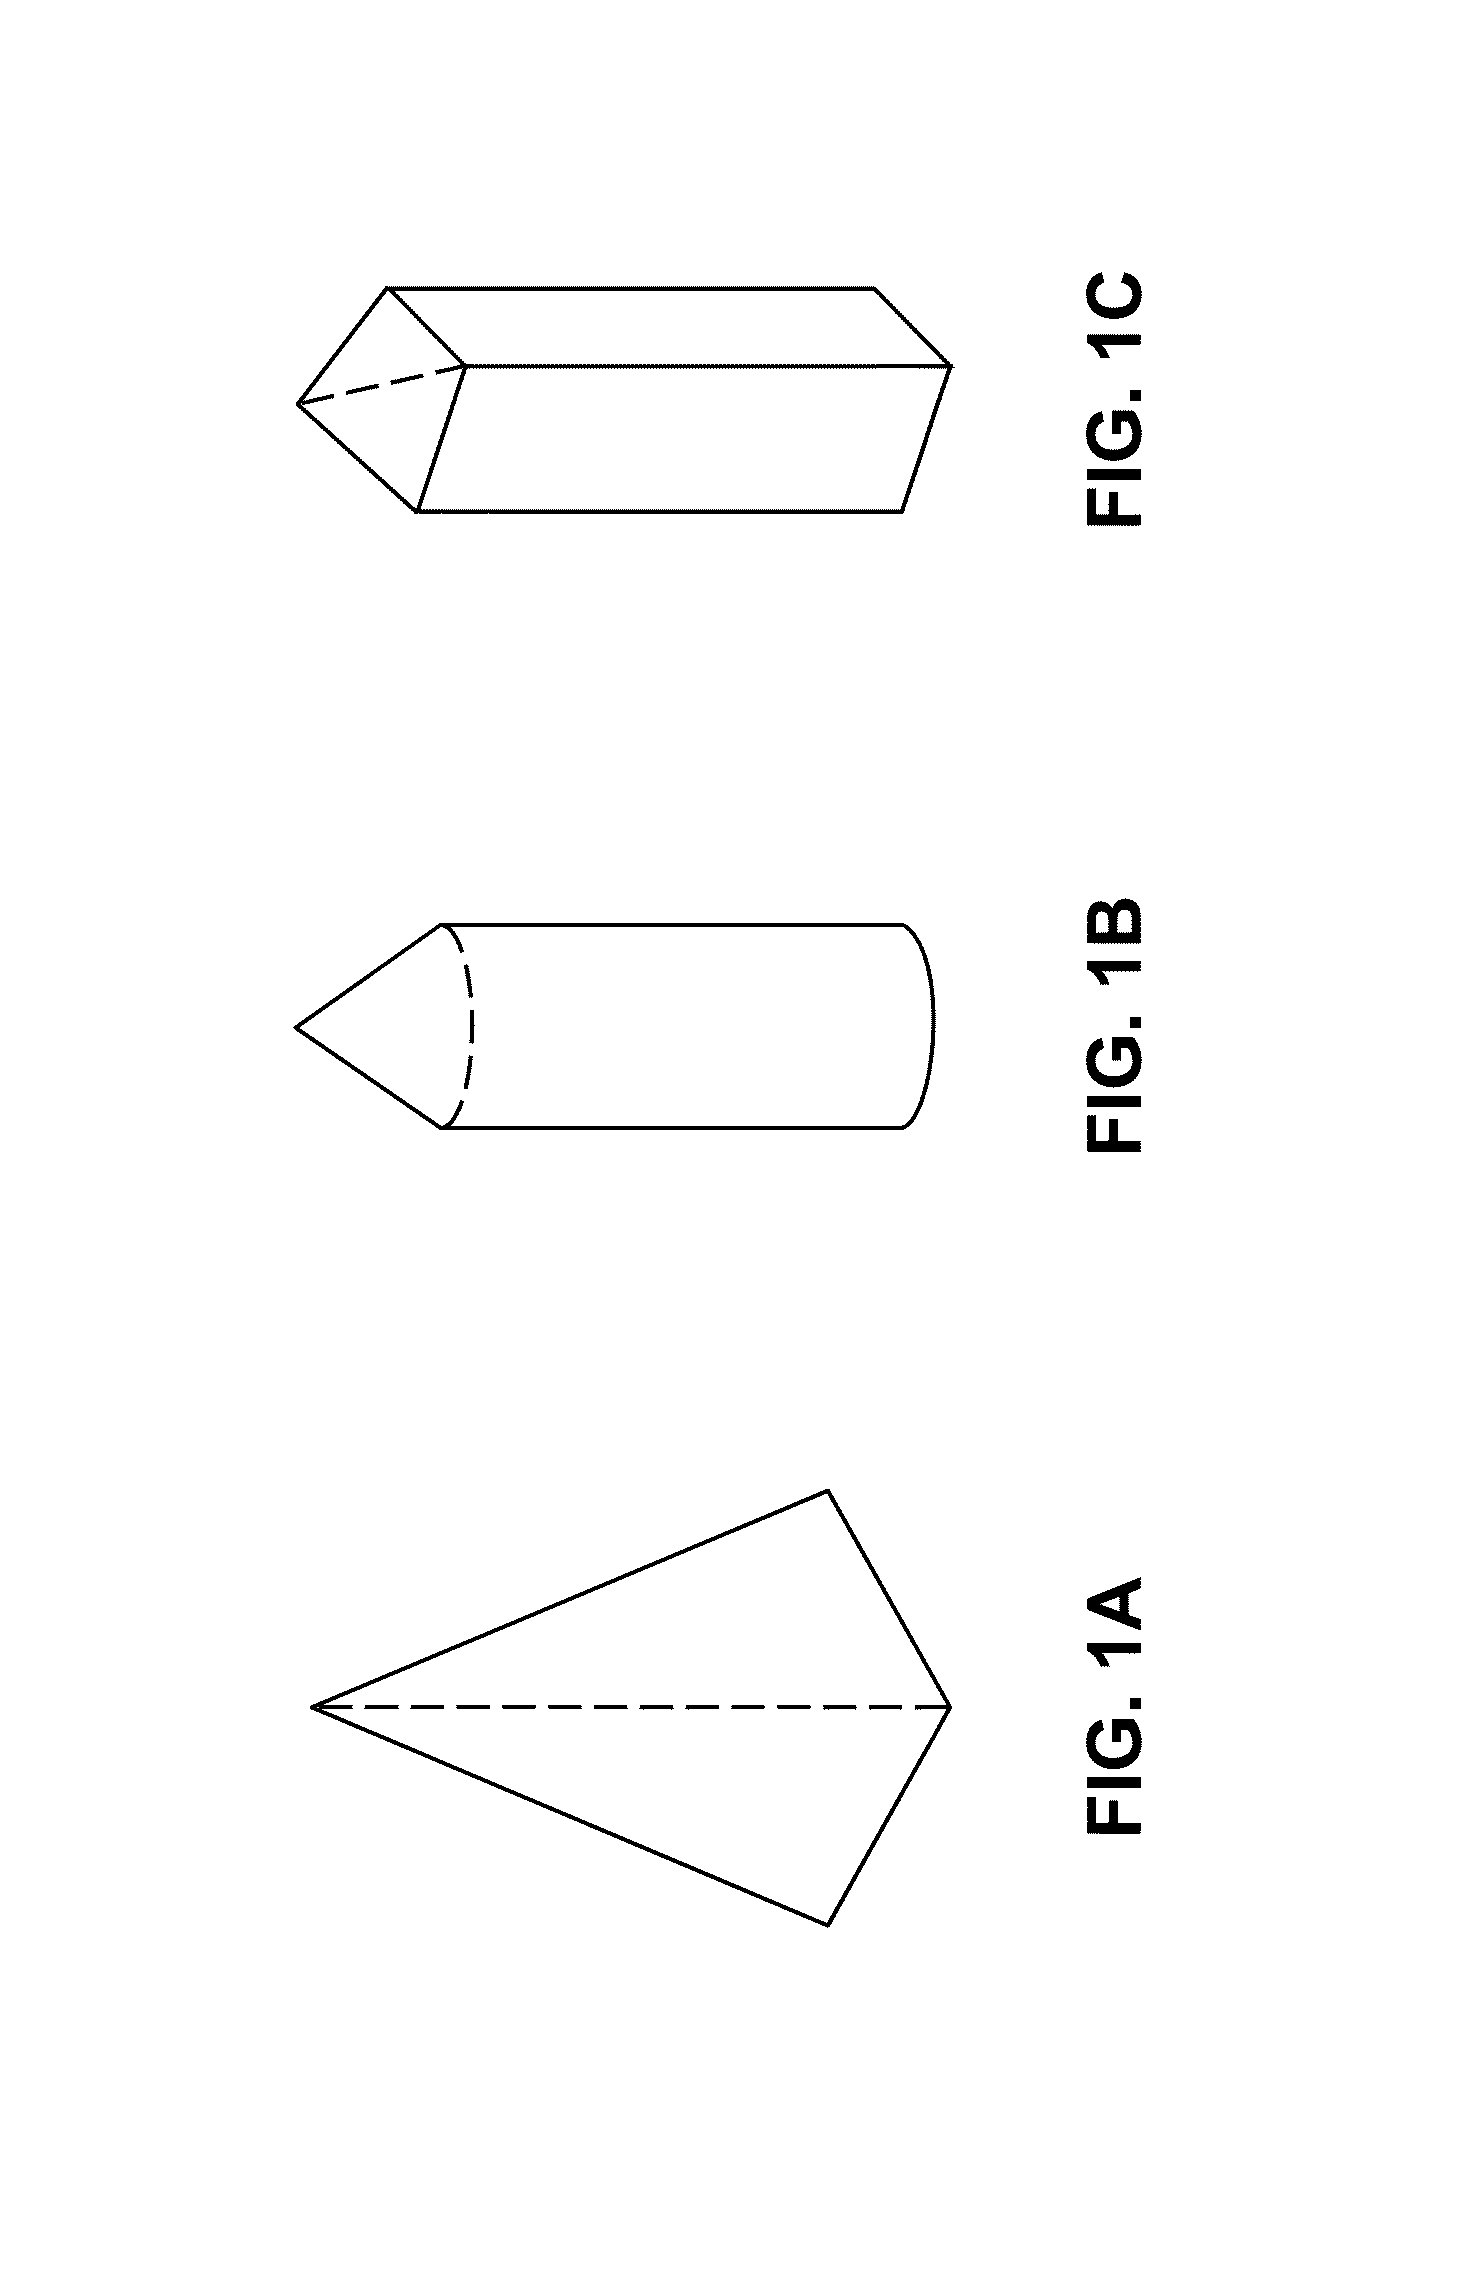 Microarray with polymer-free microstructures, methods of making, and methods of use